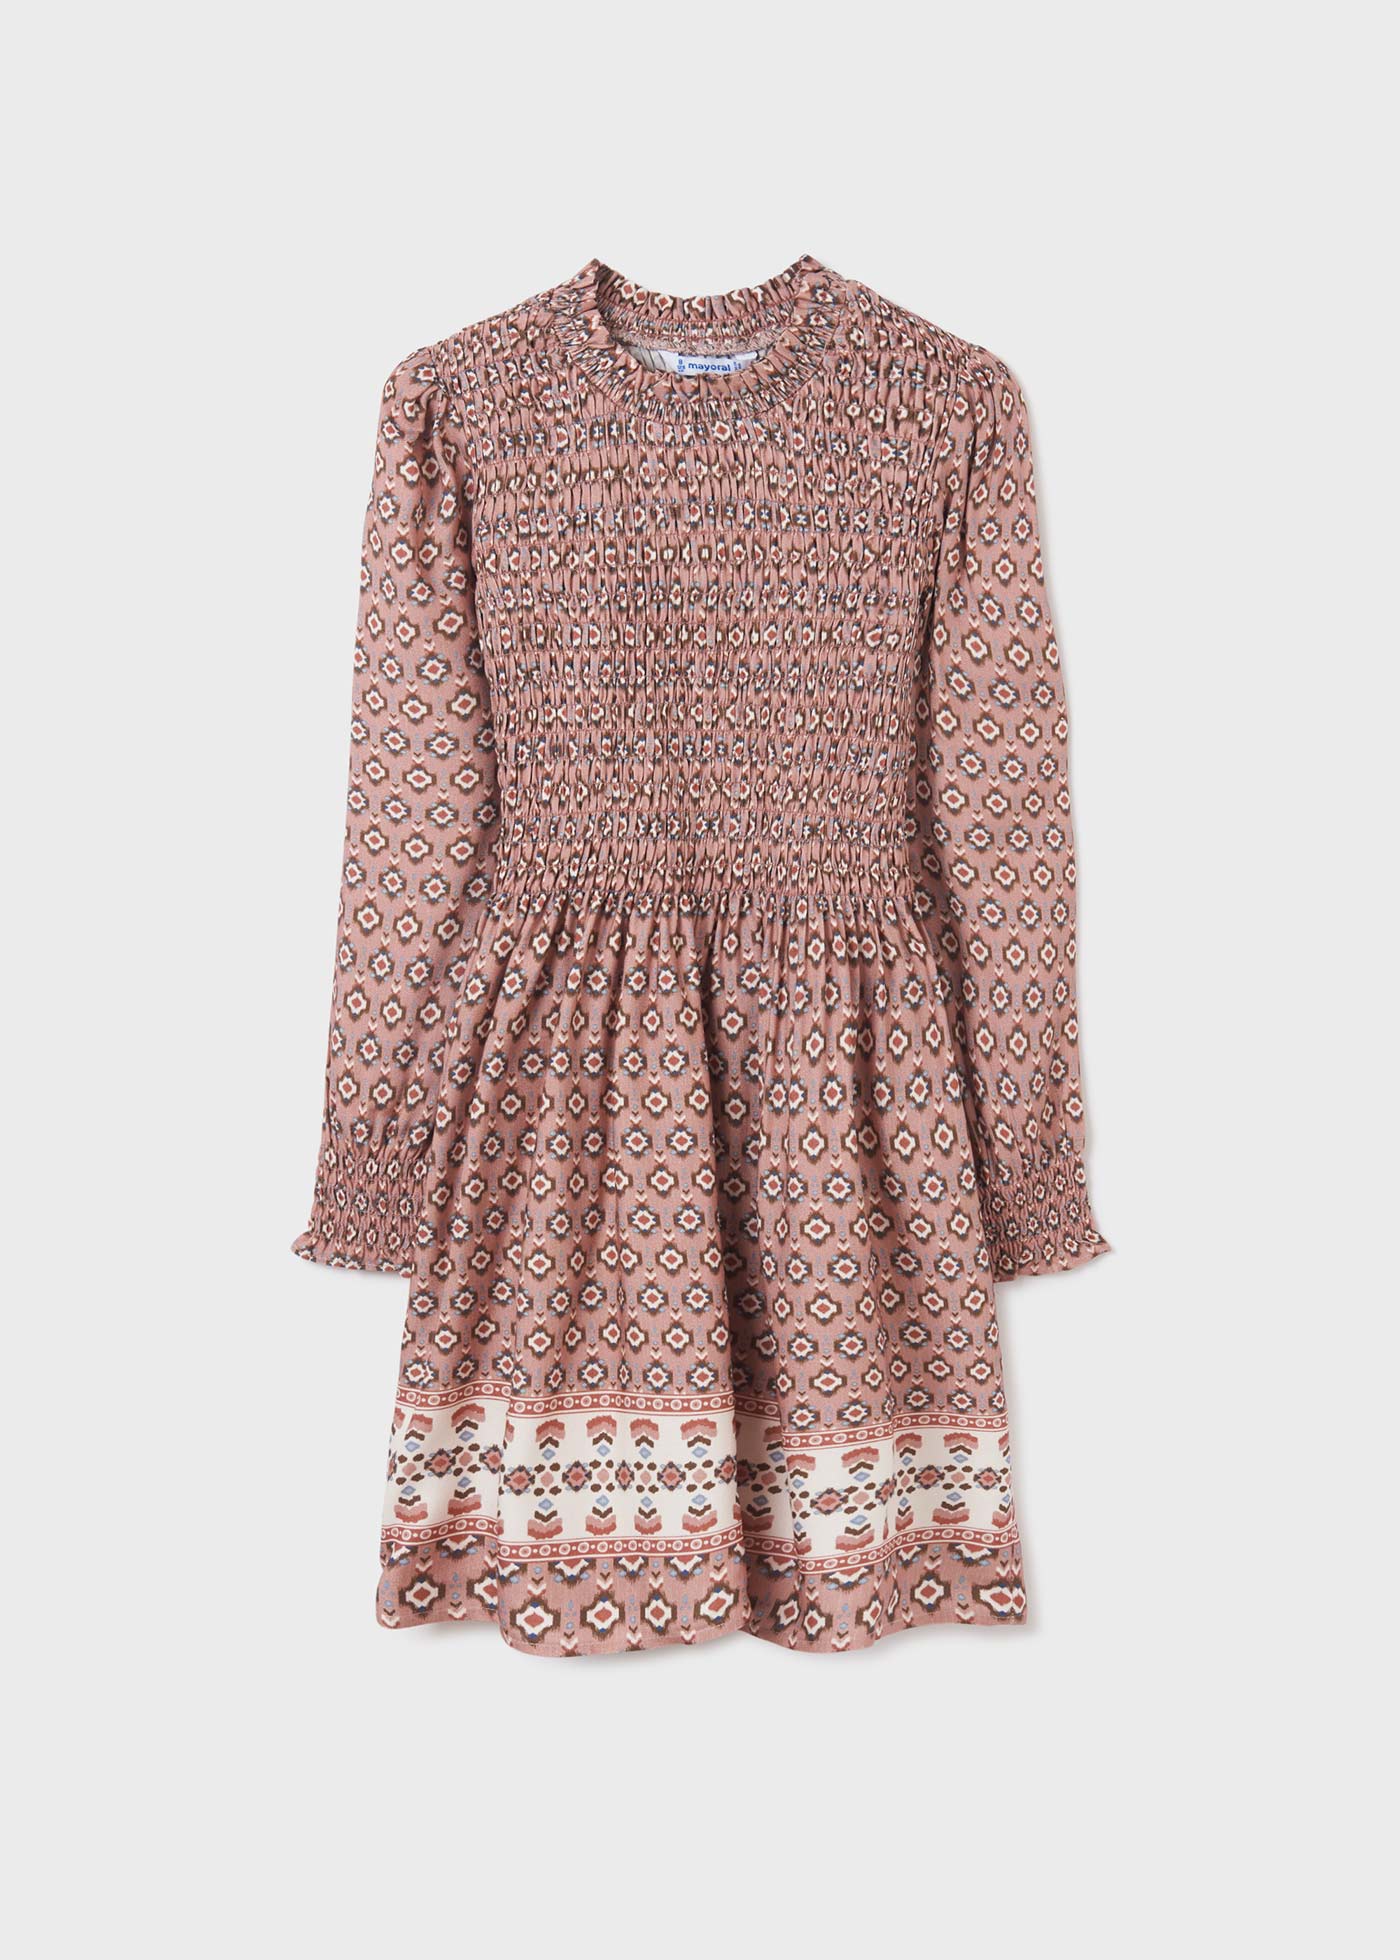 Rosy Patterned Dress